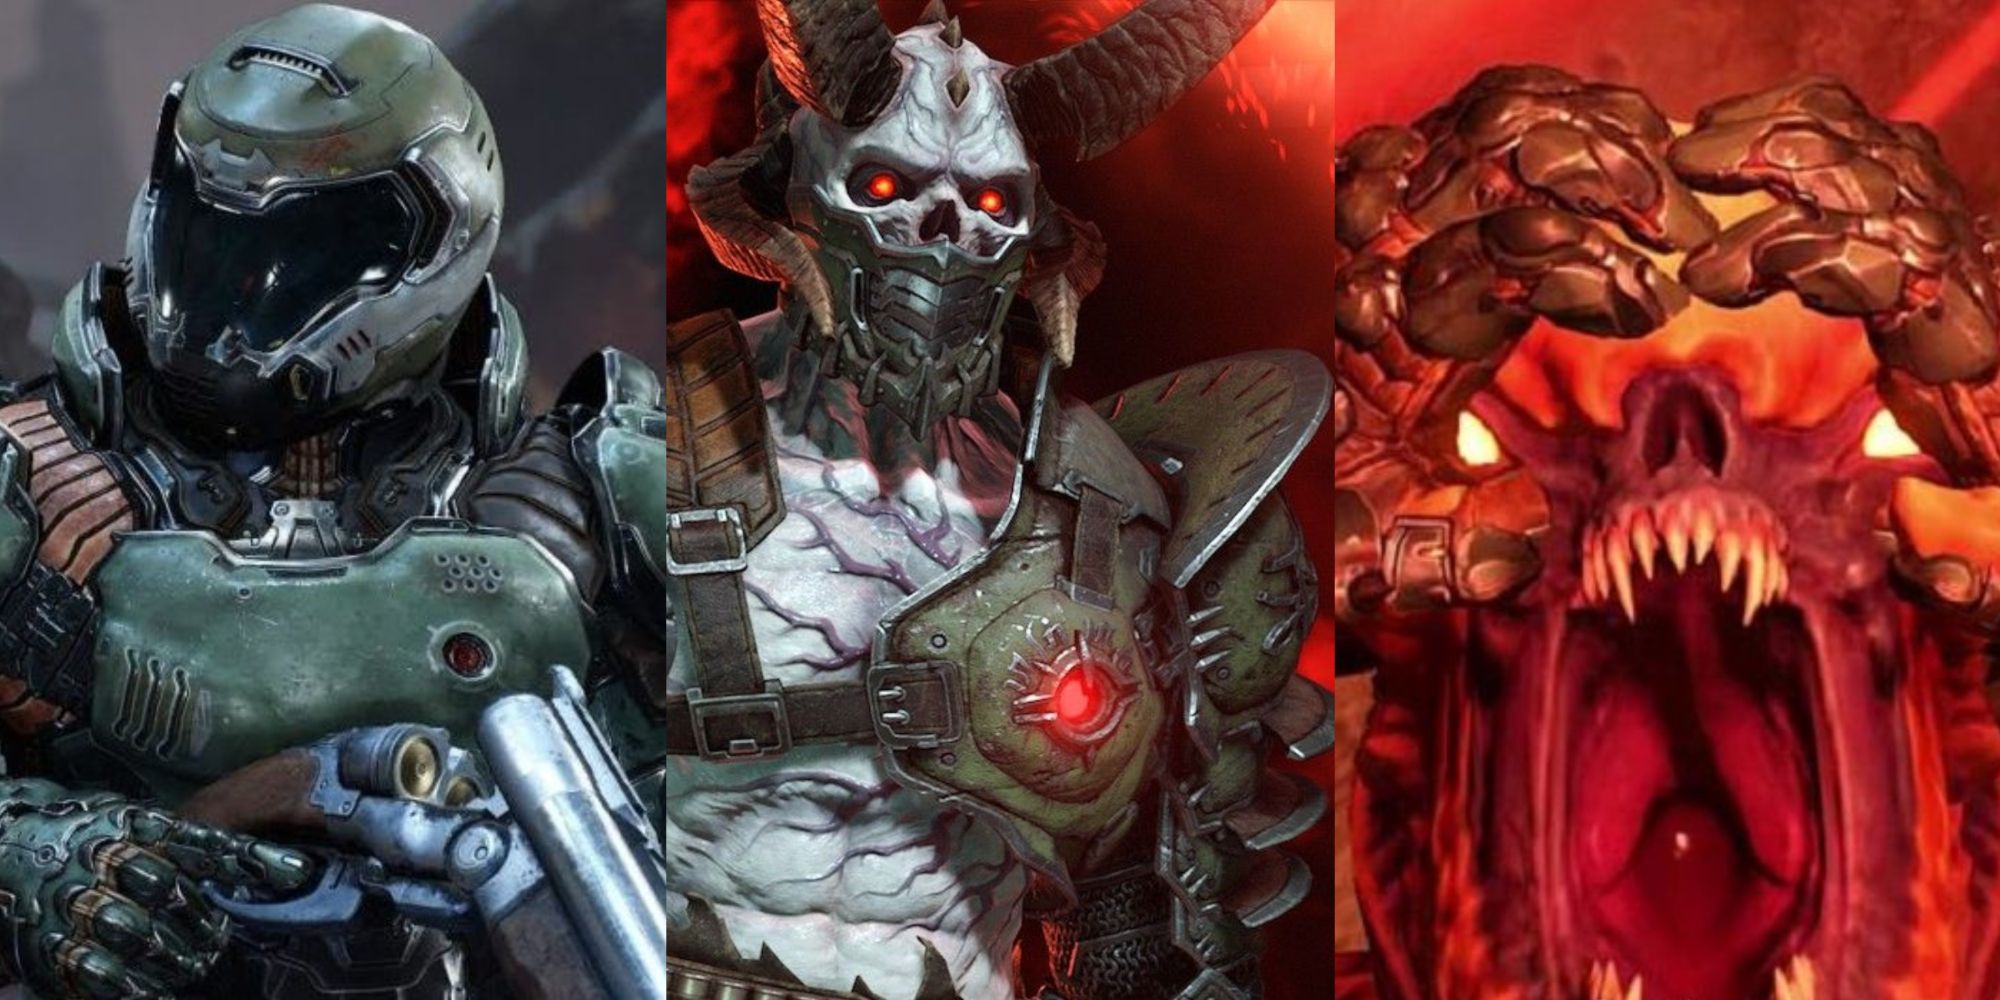 The Doom slayer, a marauder, and a demon being ripped in half